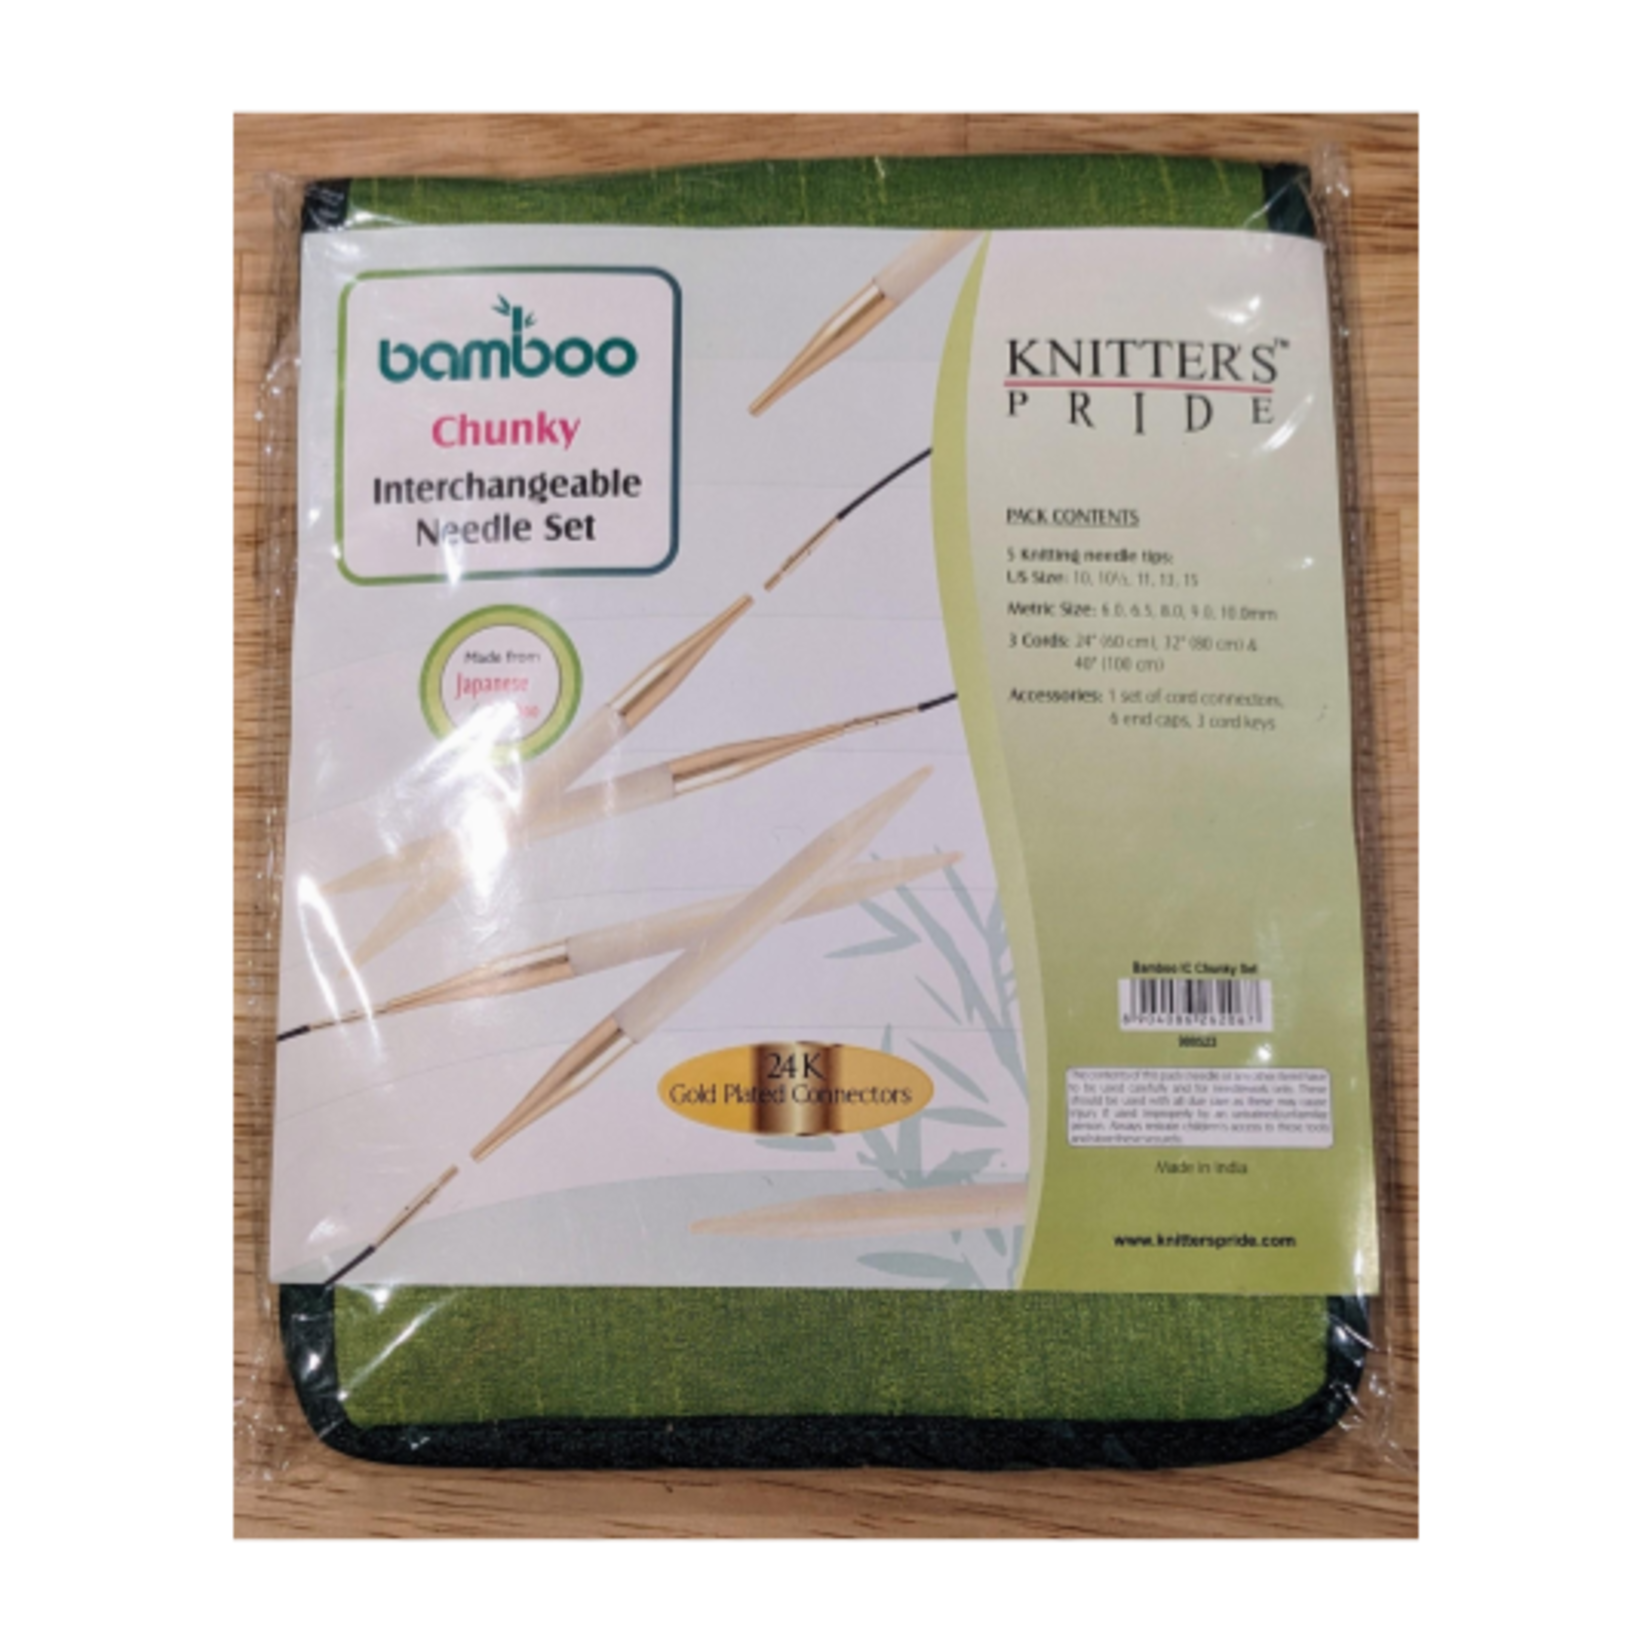 Knitter's Pride Bamboo Chunky Interchangeable Needle Set